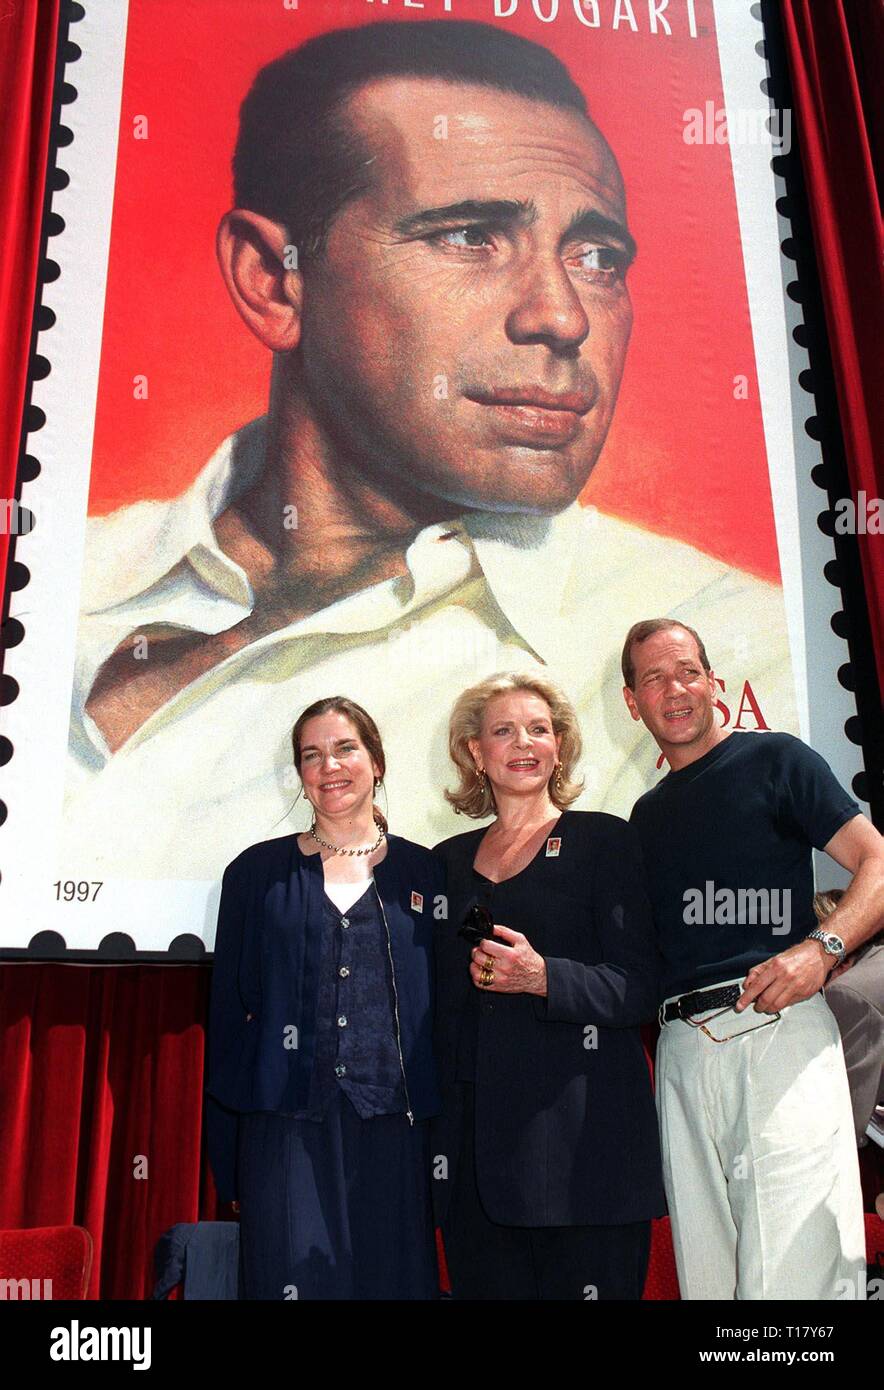 LOS ANGELES, CA. July 31, 1997:   Actress Lauren Bacall with children Stephen & Leslie Bogart at unveilling ceremony in Hollywood for new US postage stamp honoring actor Humphrey Bogart. Stock Photo